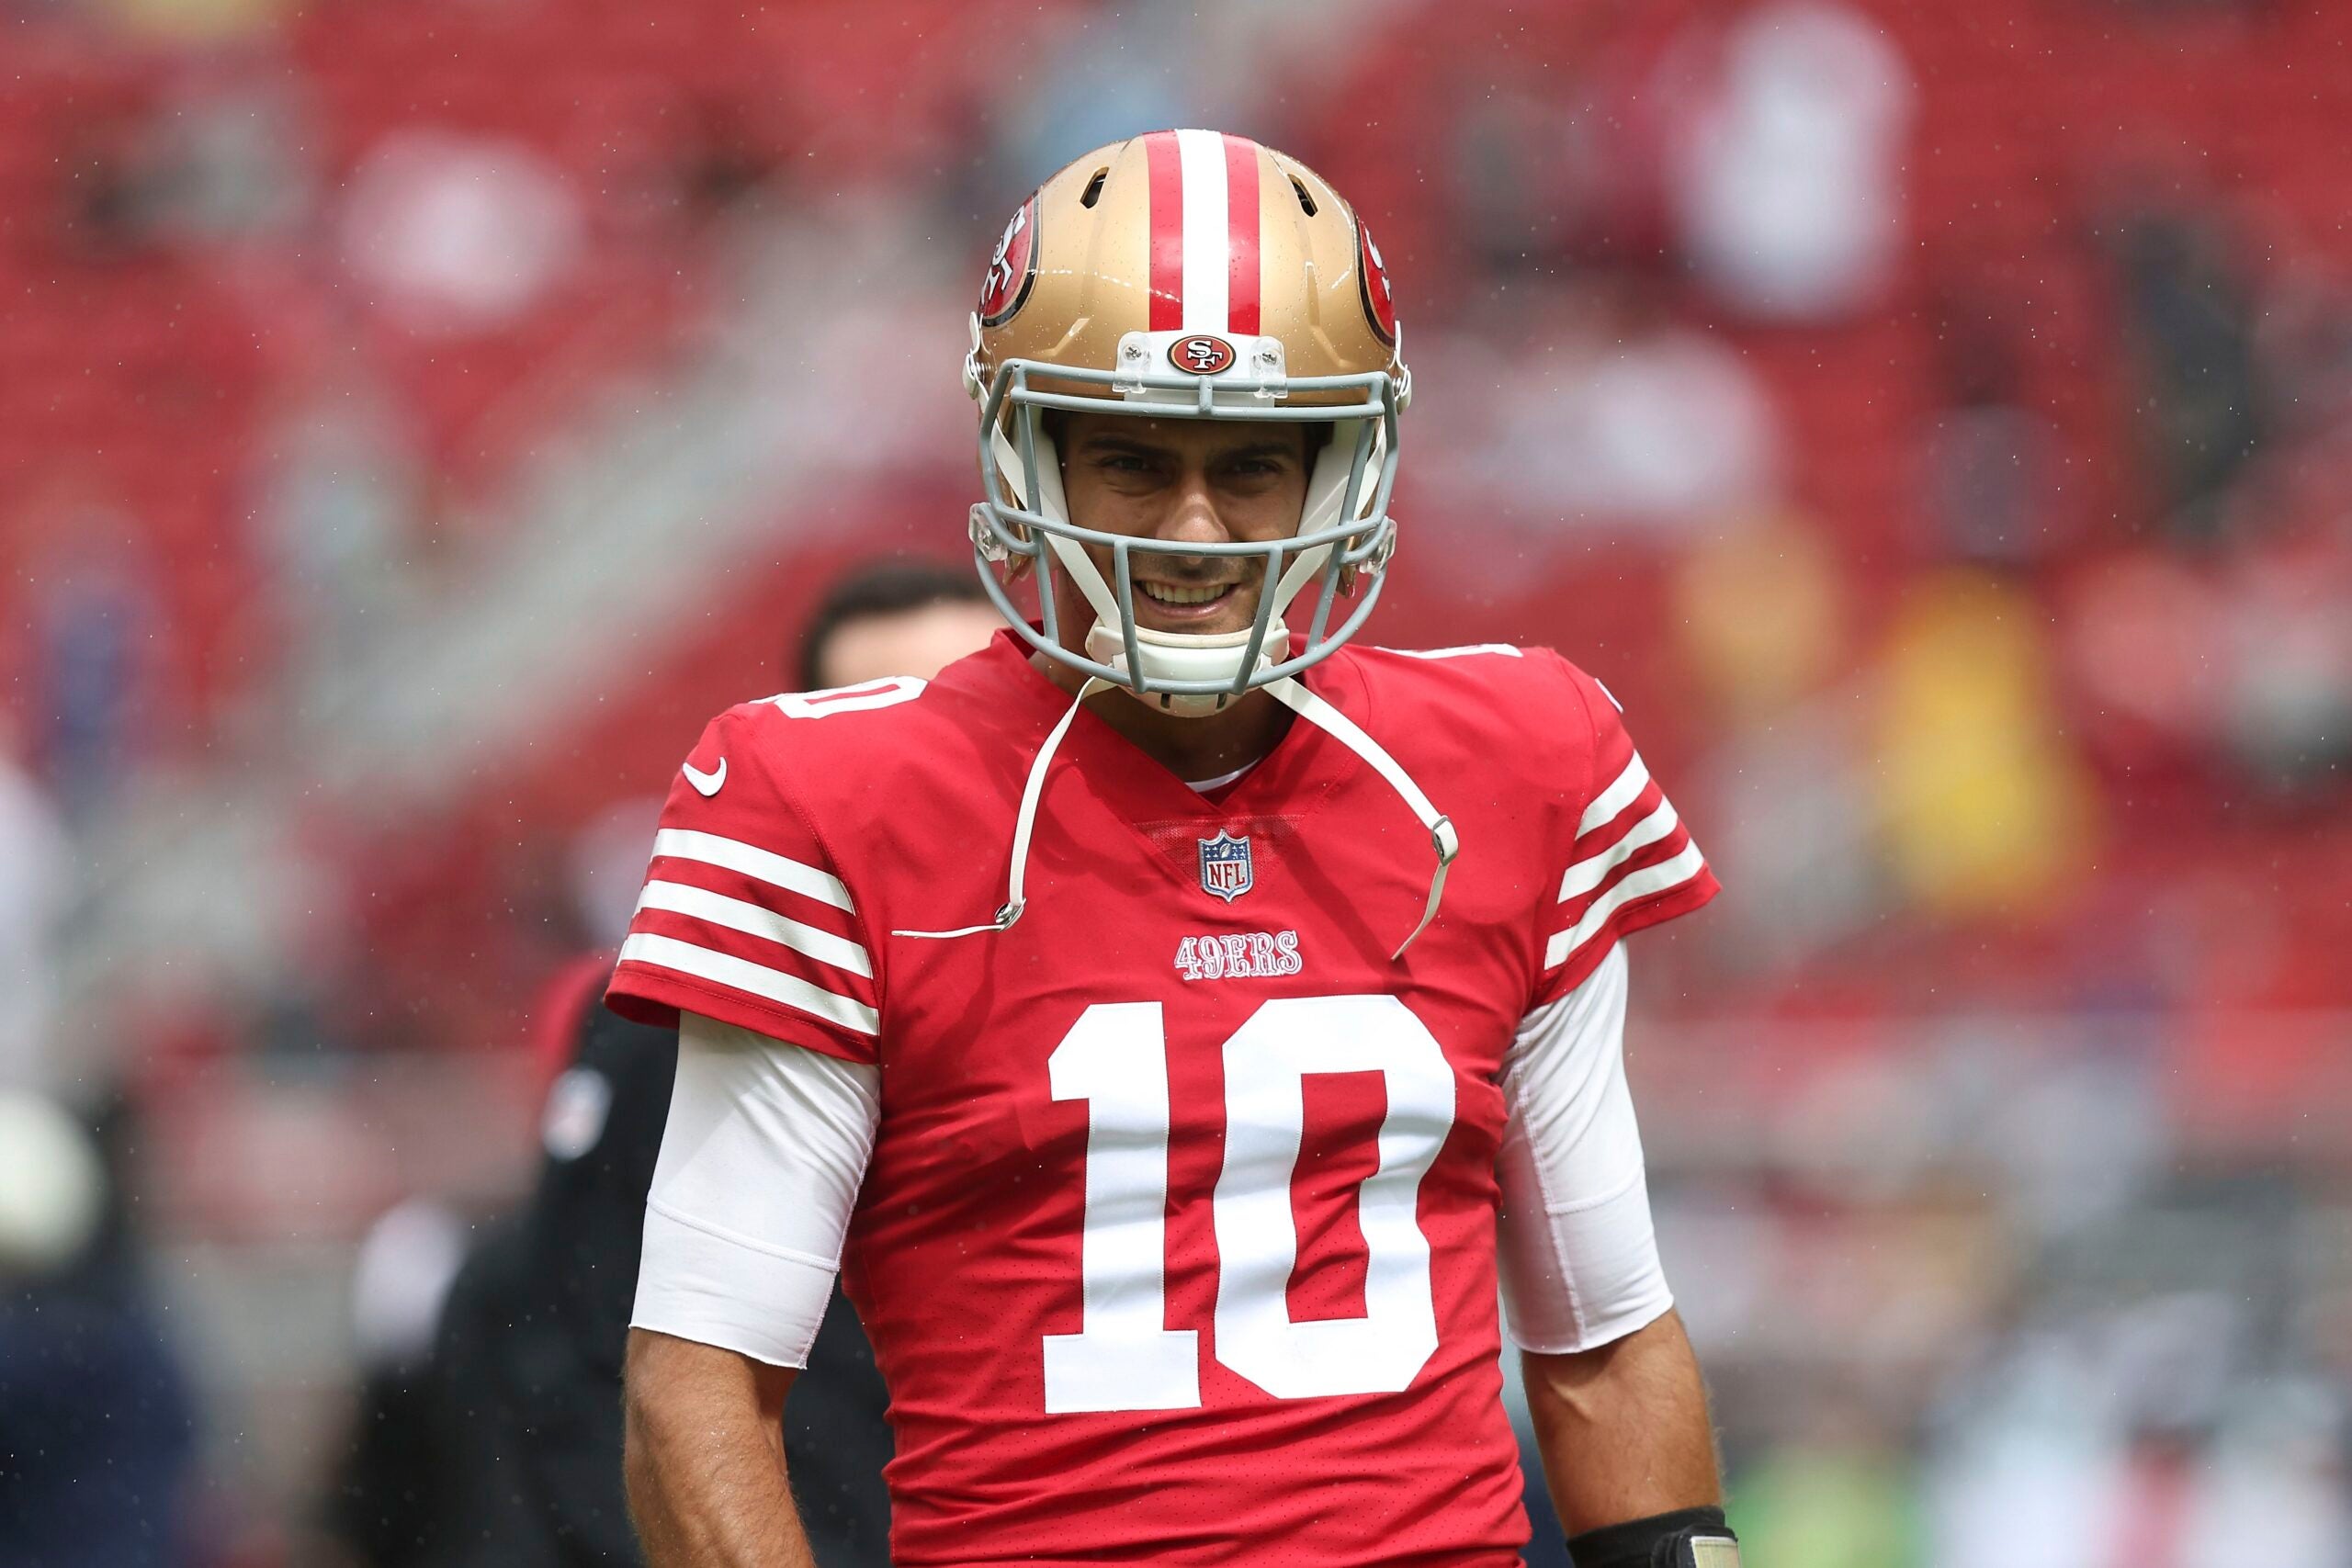 San Francisco 49ers quarterback Jimmy Garoppolo looks on before a game against the Seattle Seahawks, Sunday, Sept. 18, 2022 in Santa Clara, Calif.